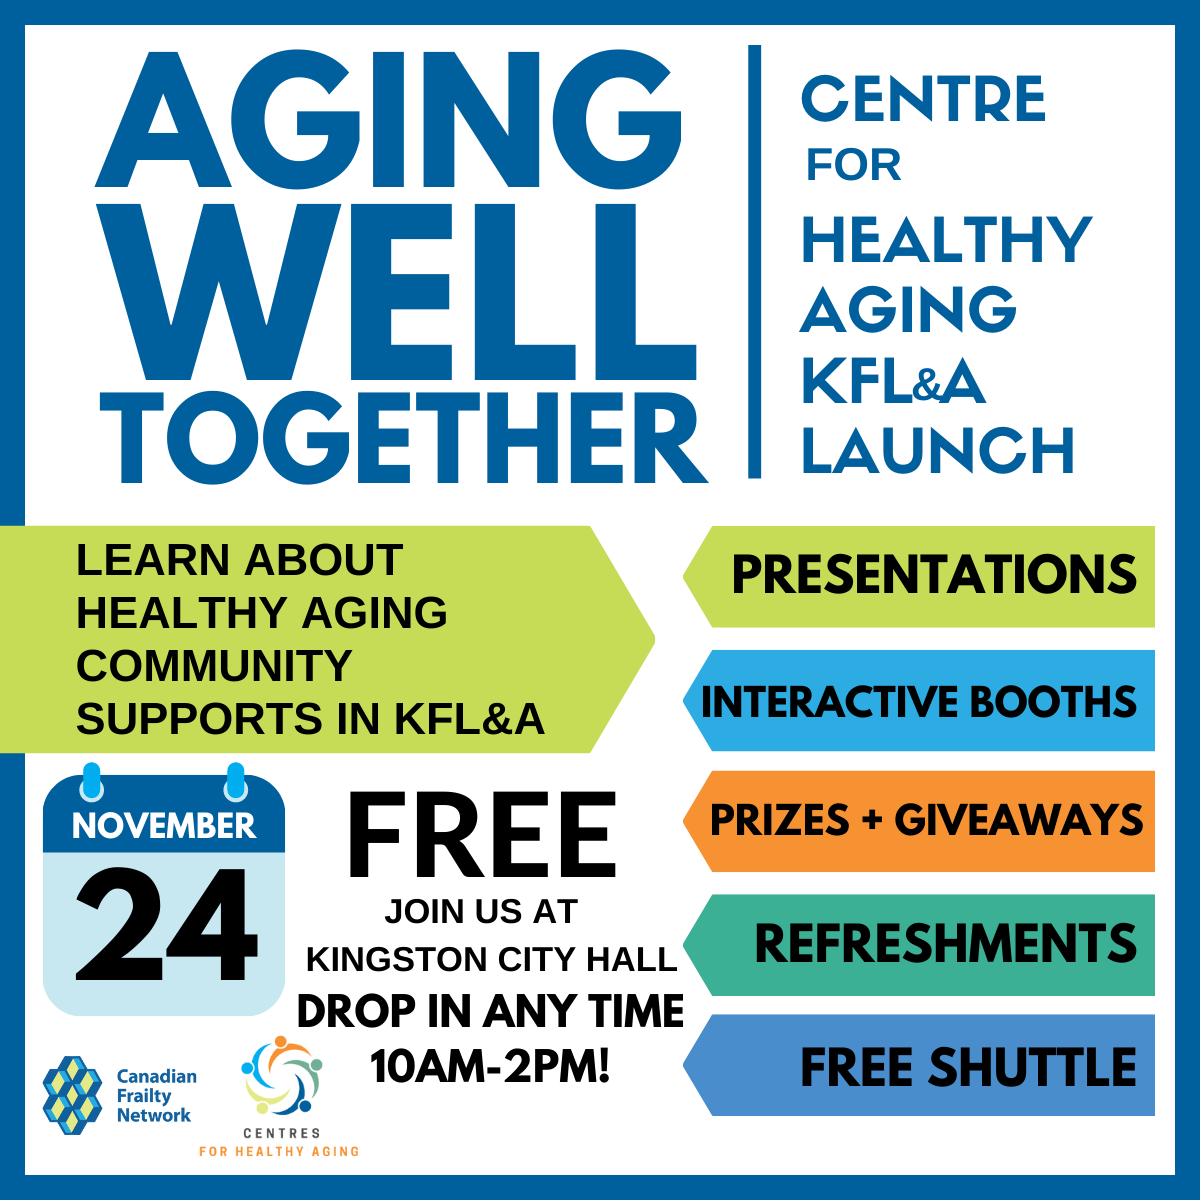 Aging Well Together: Centre for Healthy Aging KFL&A Launch Logo